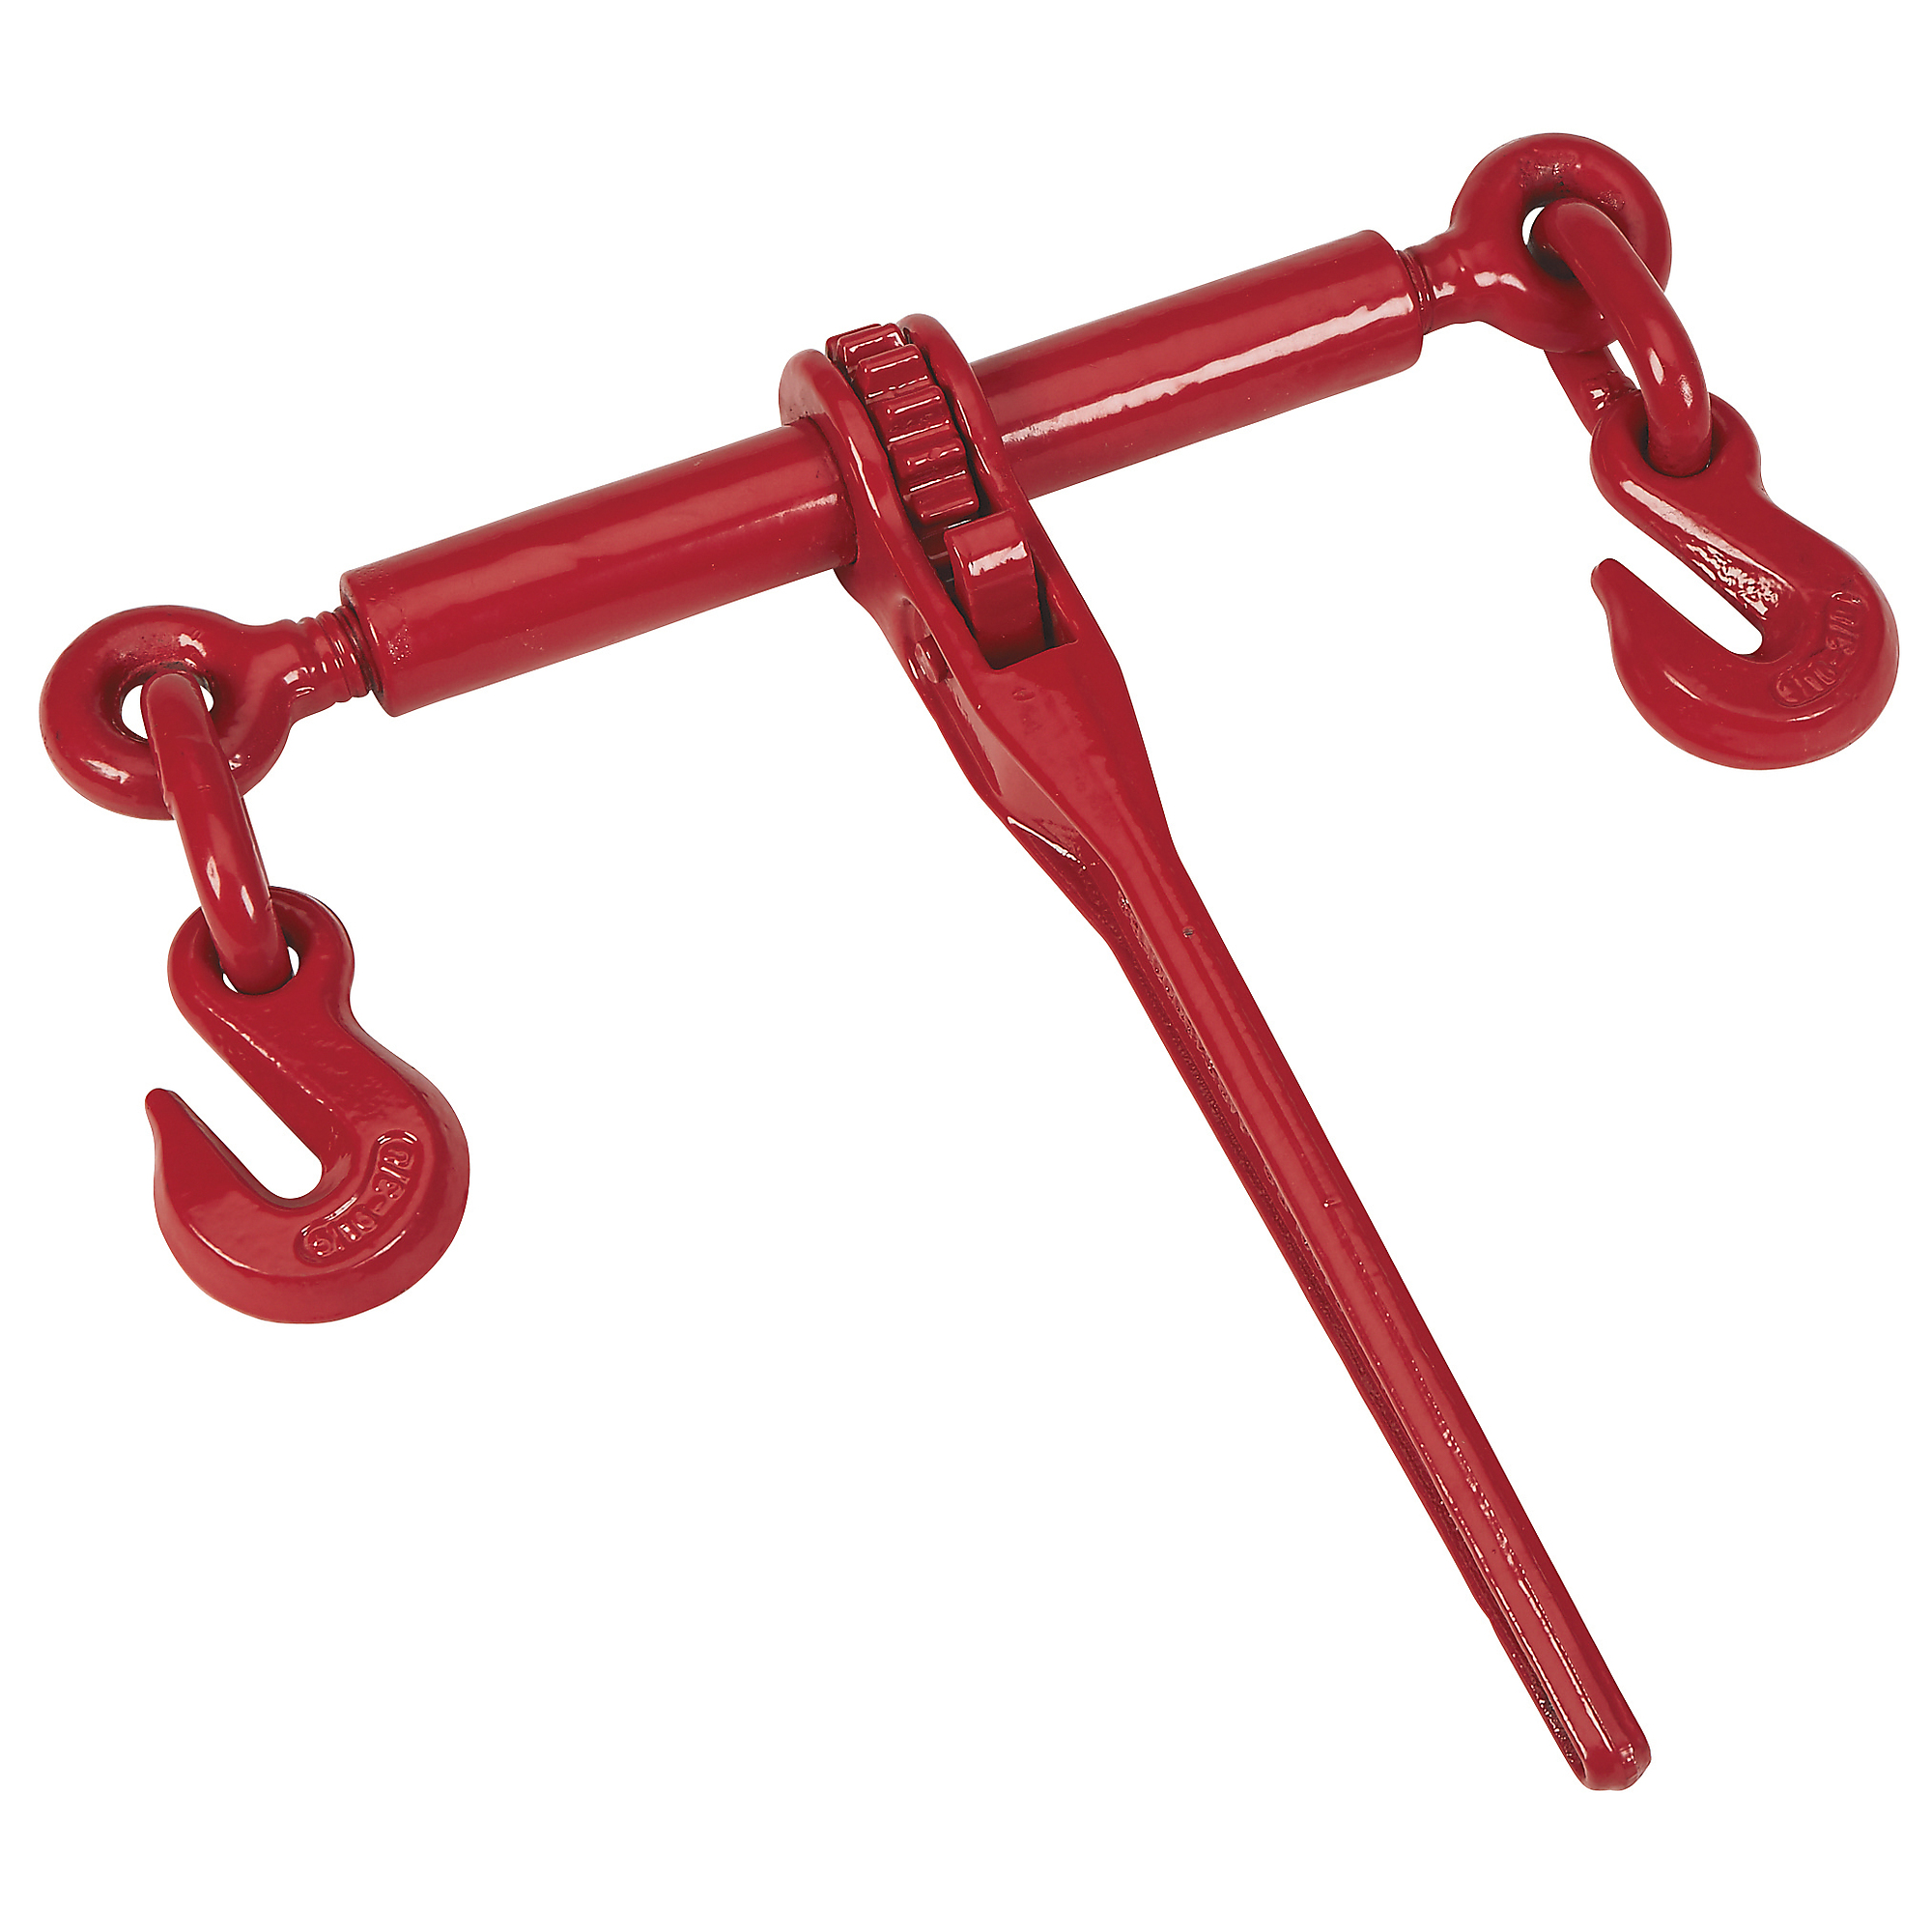 Ultra-Tow 5/16Inch Ratchet Load Binder, 5400-lb. Working Load Capacity, 19,000-lb. Breaking Strength